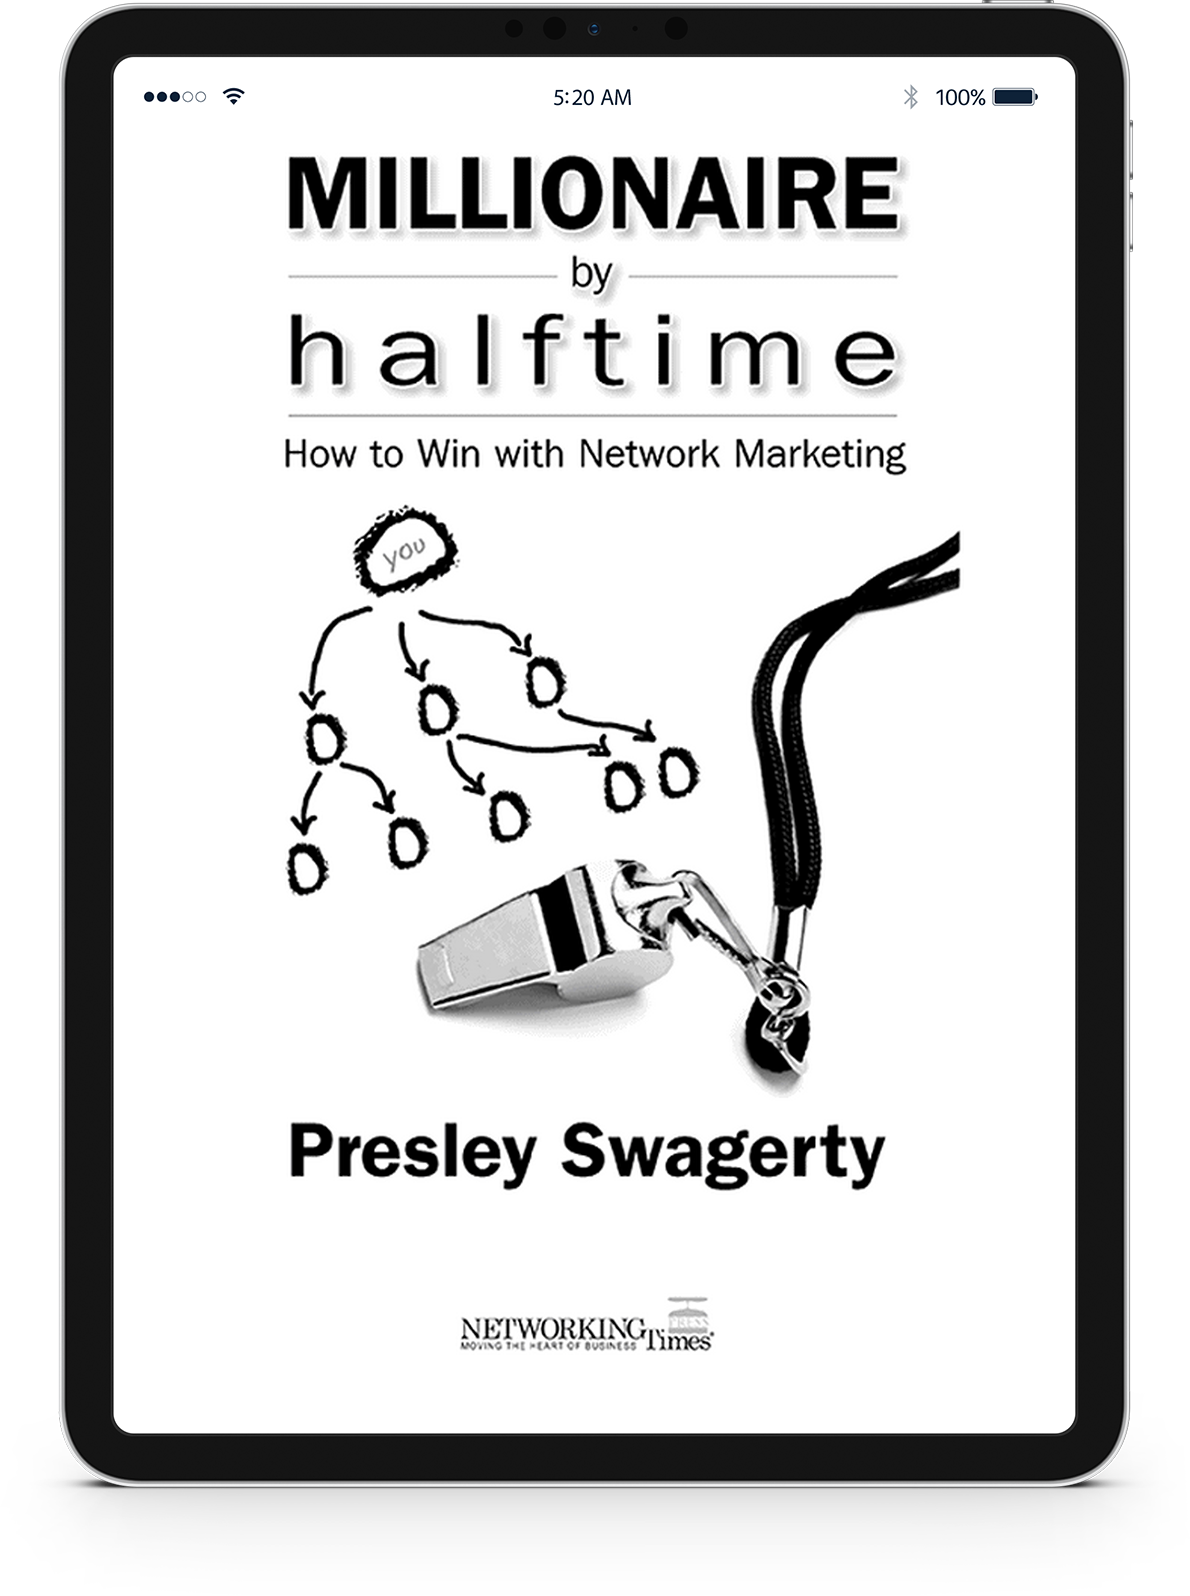 Photo of Apple iPad with Millionaire by Halftime by Presley Swagerty book cover